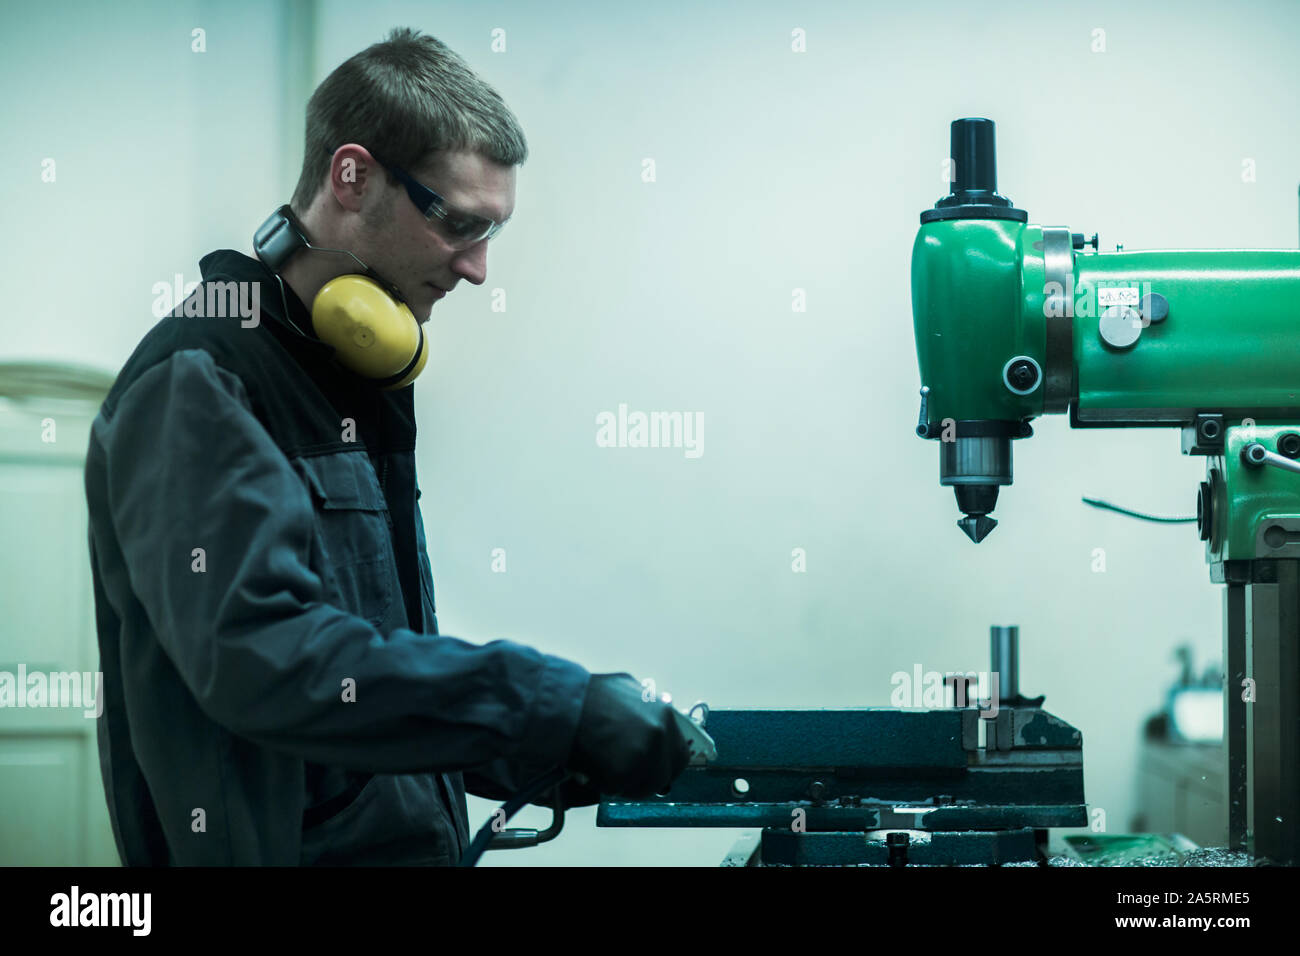 engineer in a workshop milling a tool Stock Photo